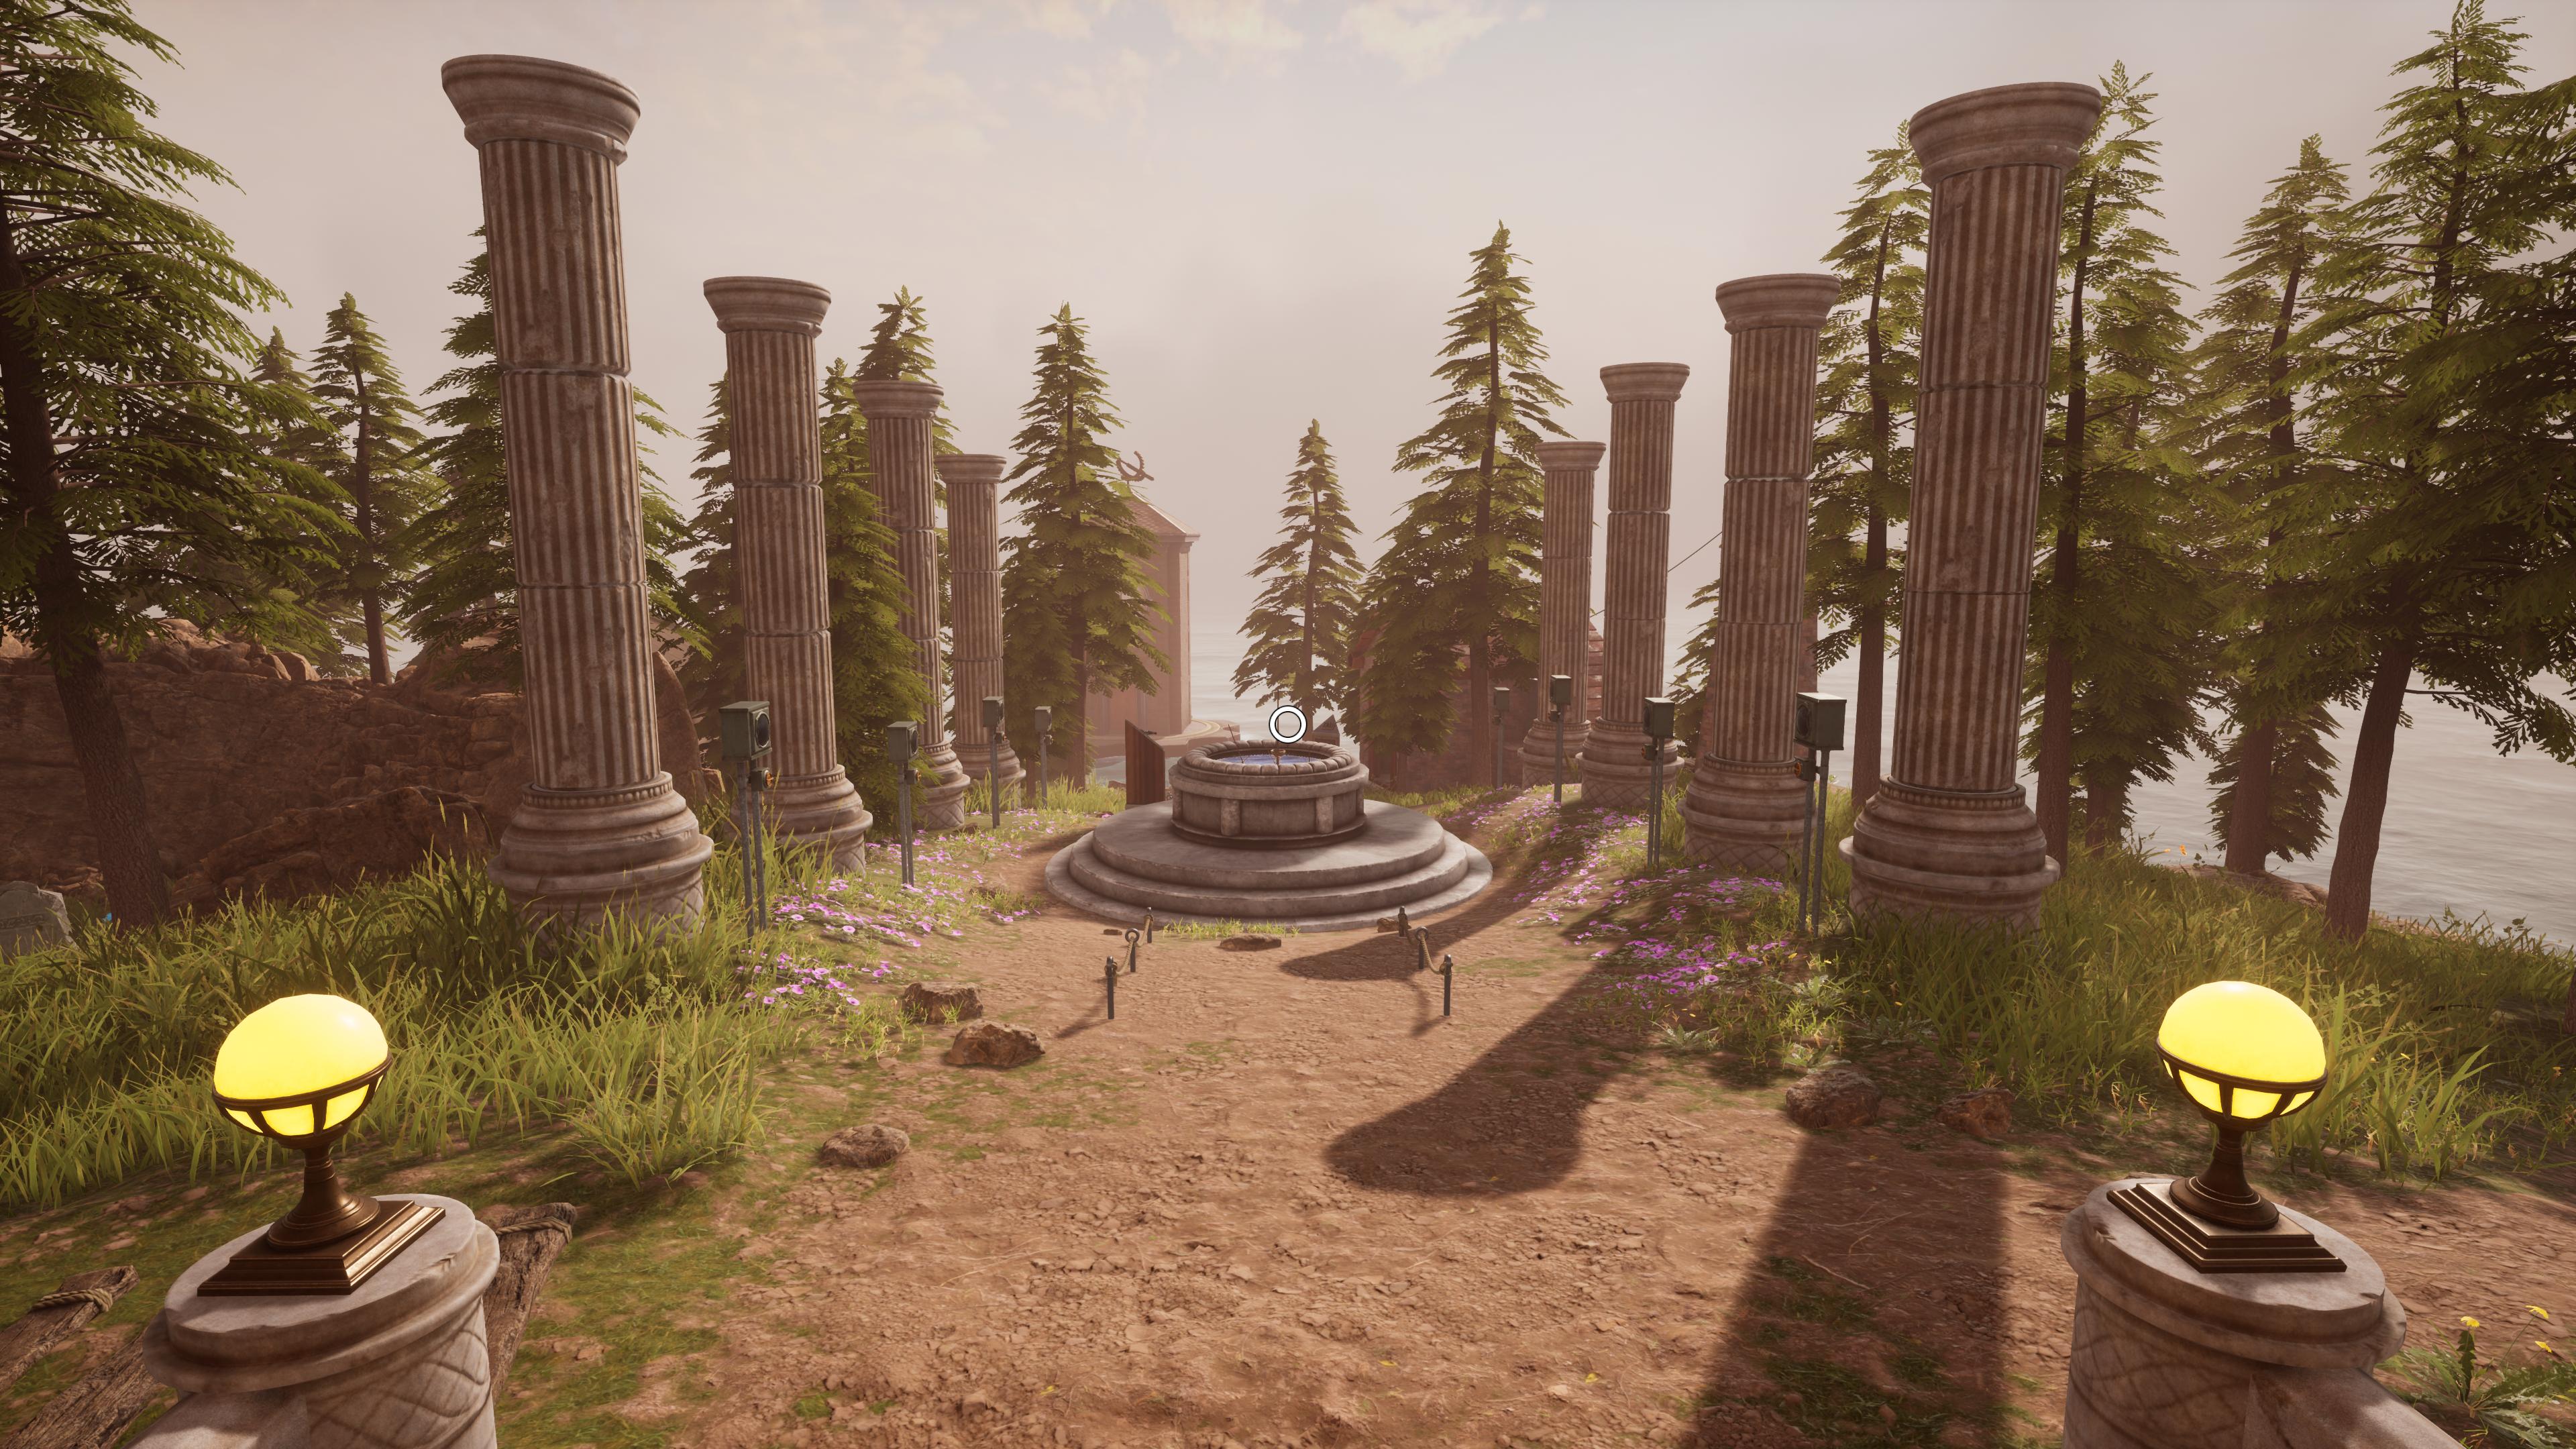 myst remake review